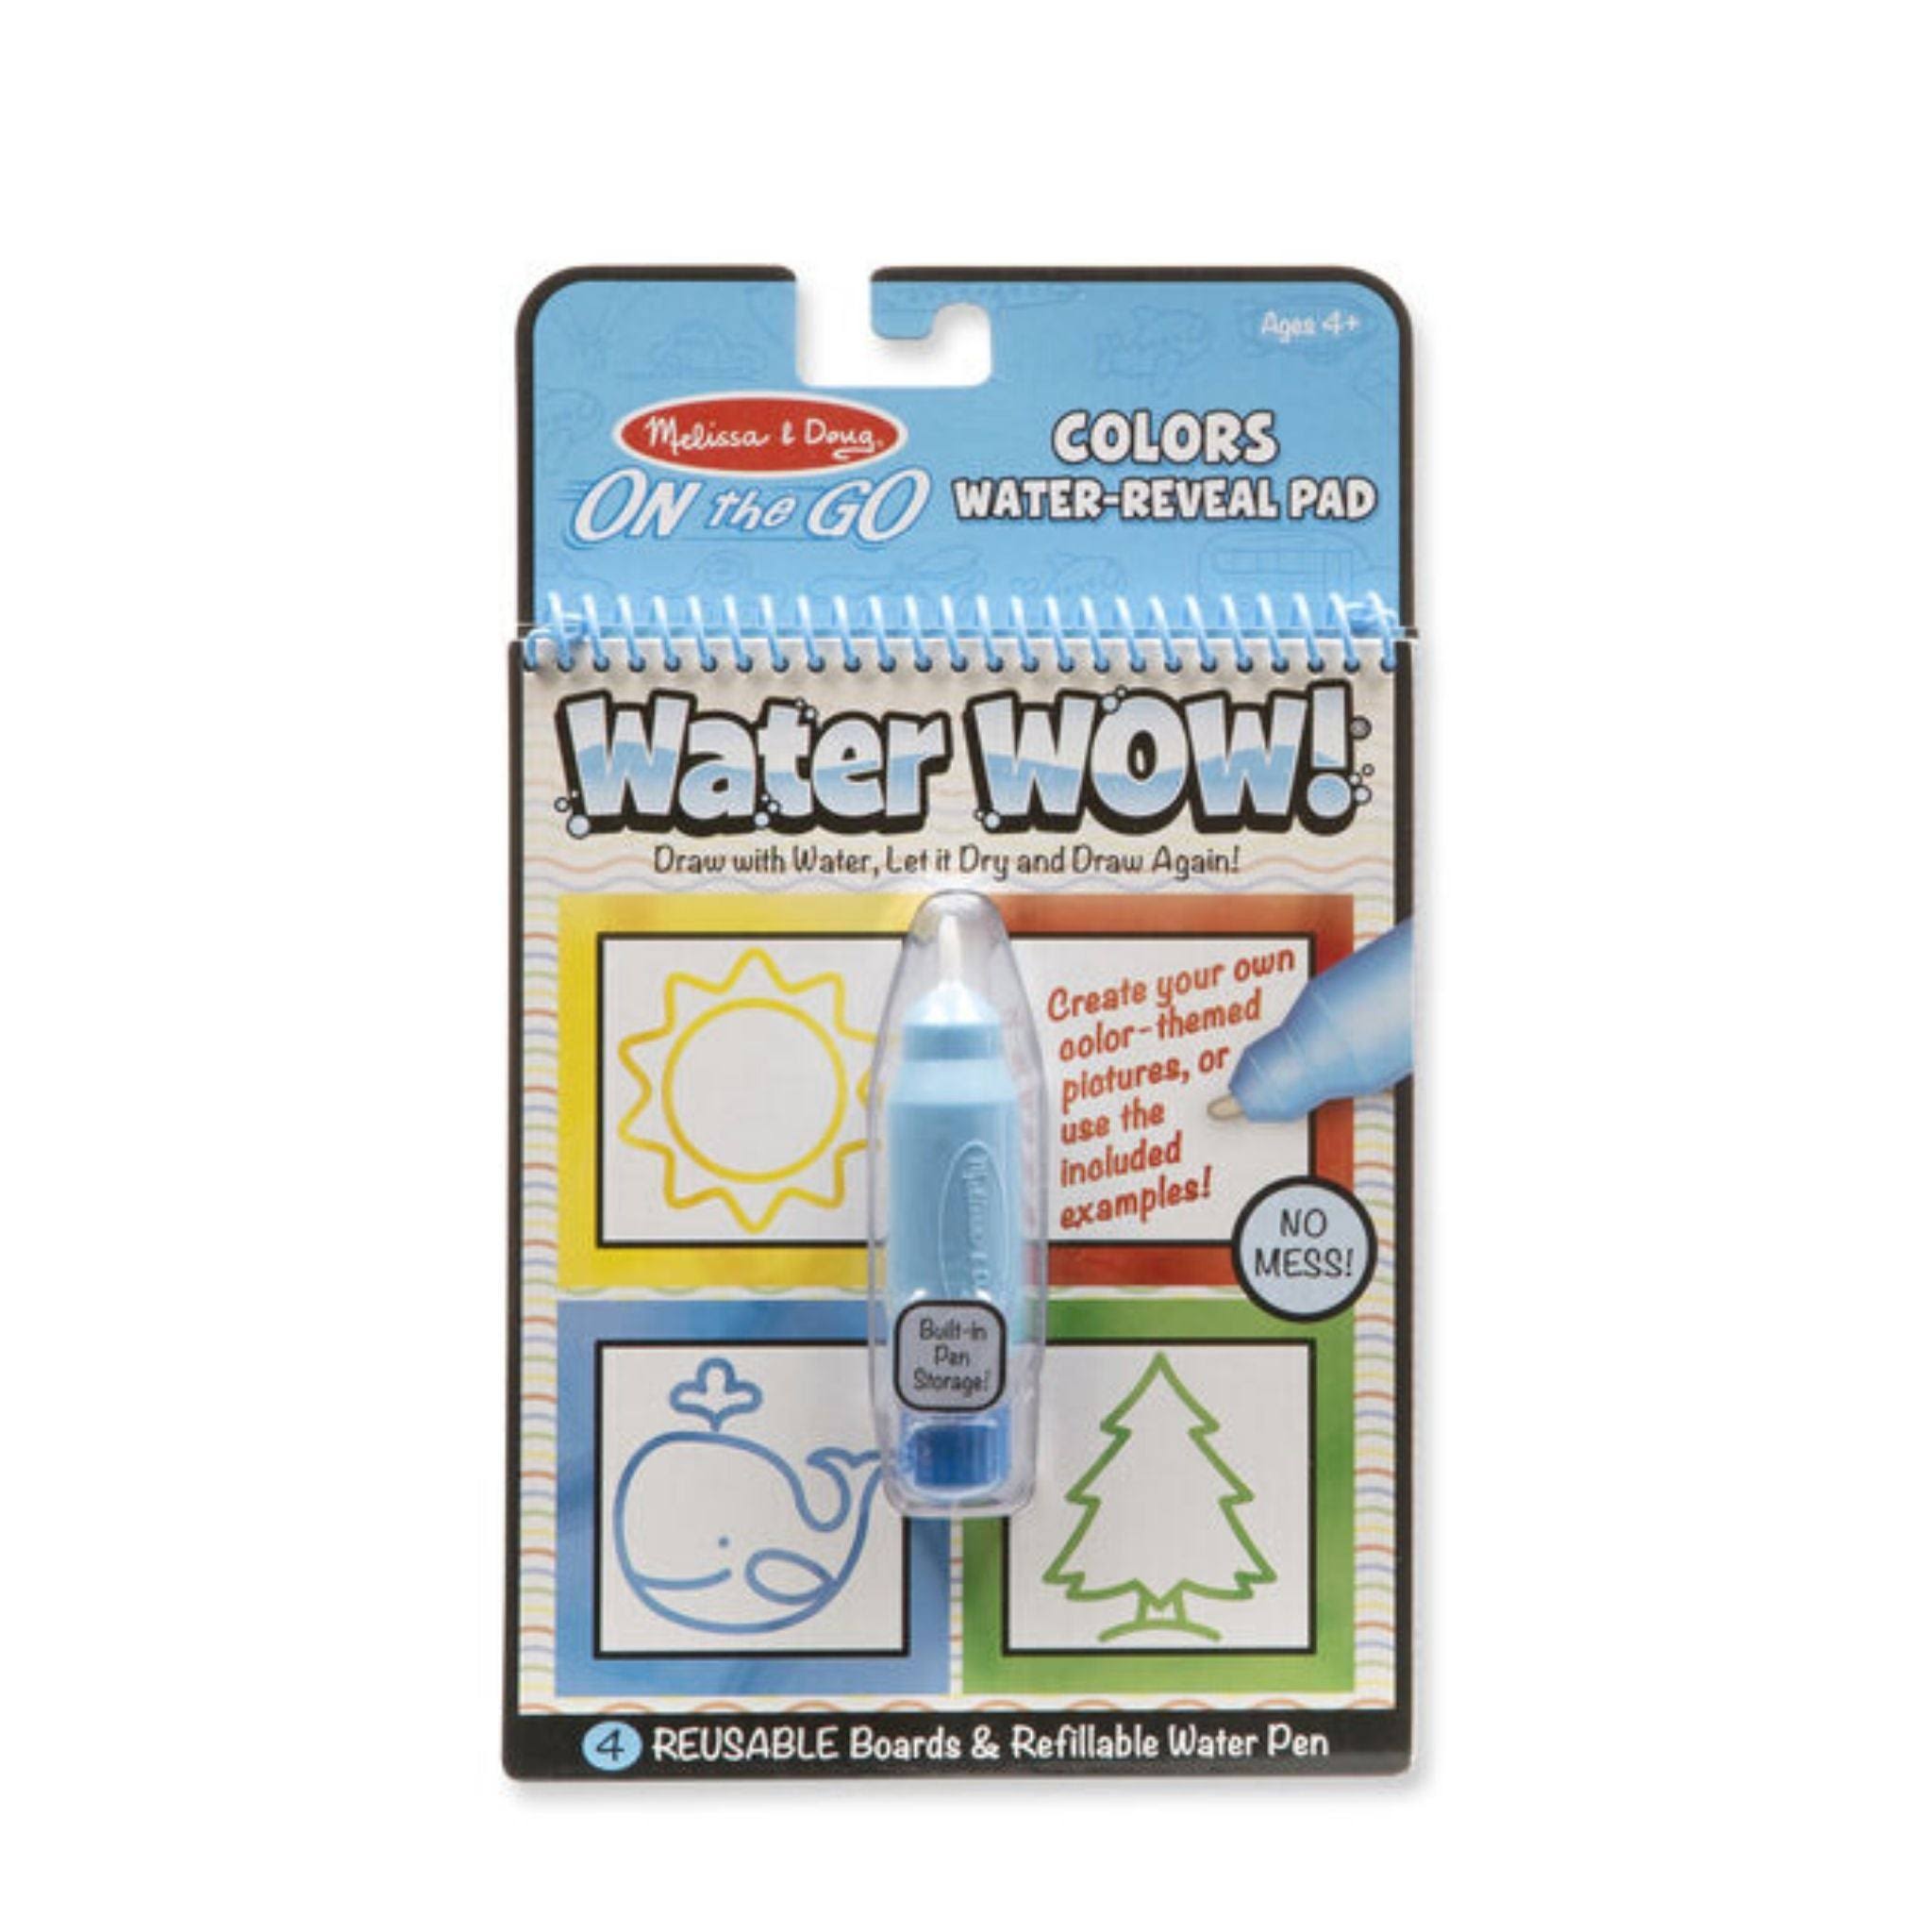 Melissa & Doug On The Go Water WOW! Reusable Water-Reveal Activity Pad - Colors, Shapes